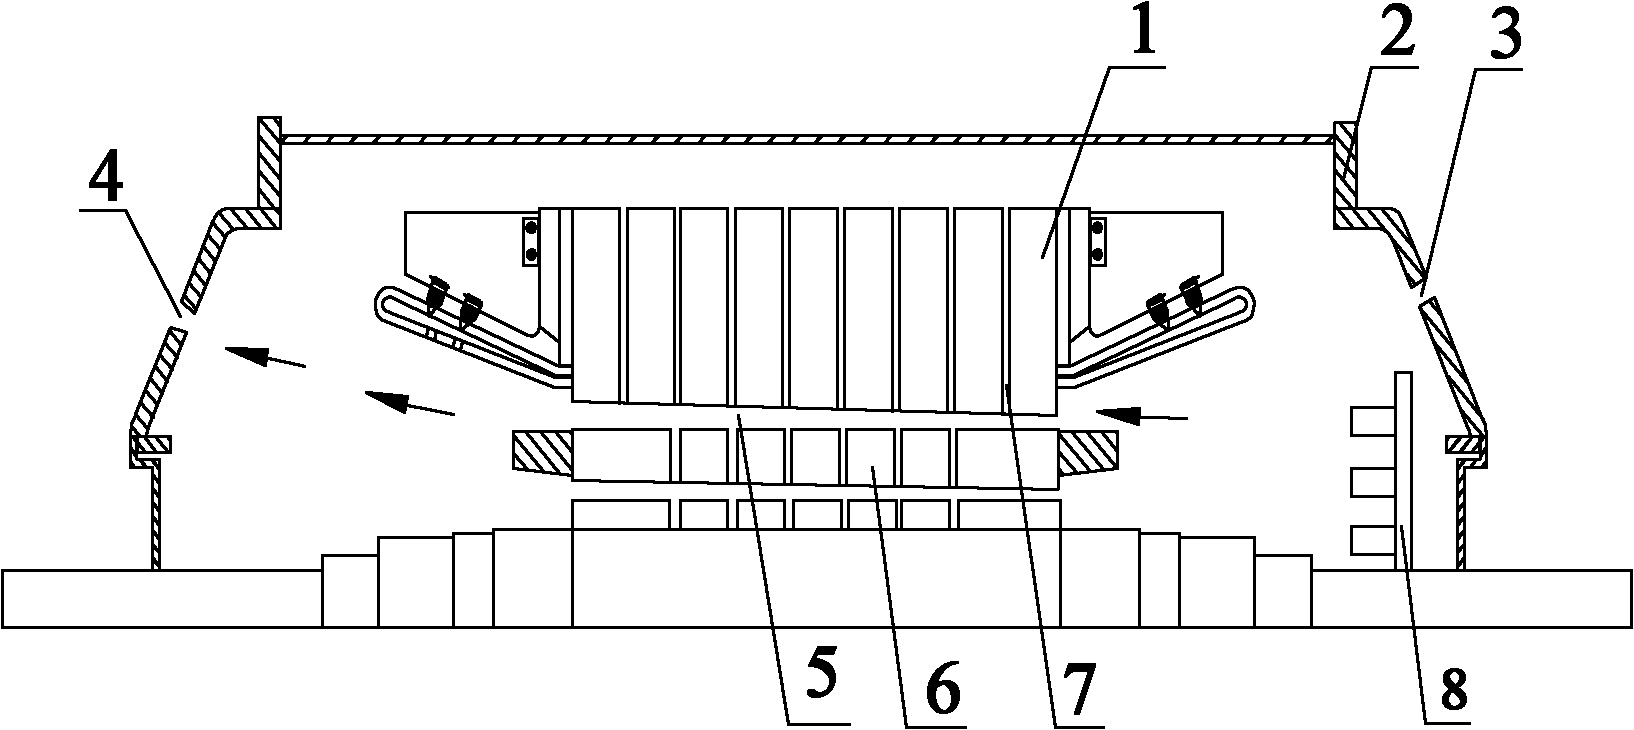 Motor air cooling structure and horizontal motor